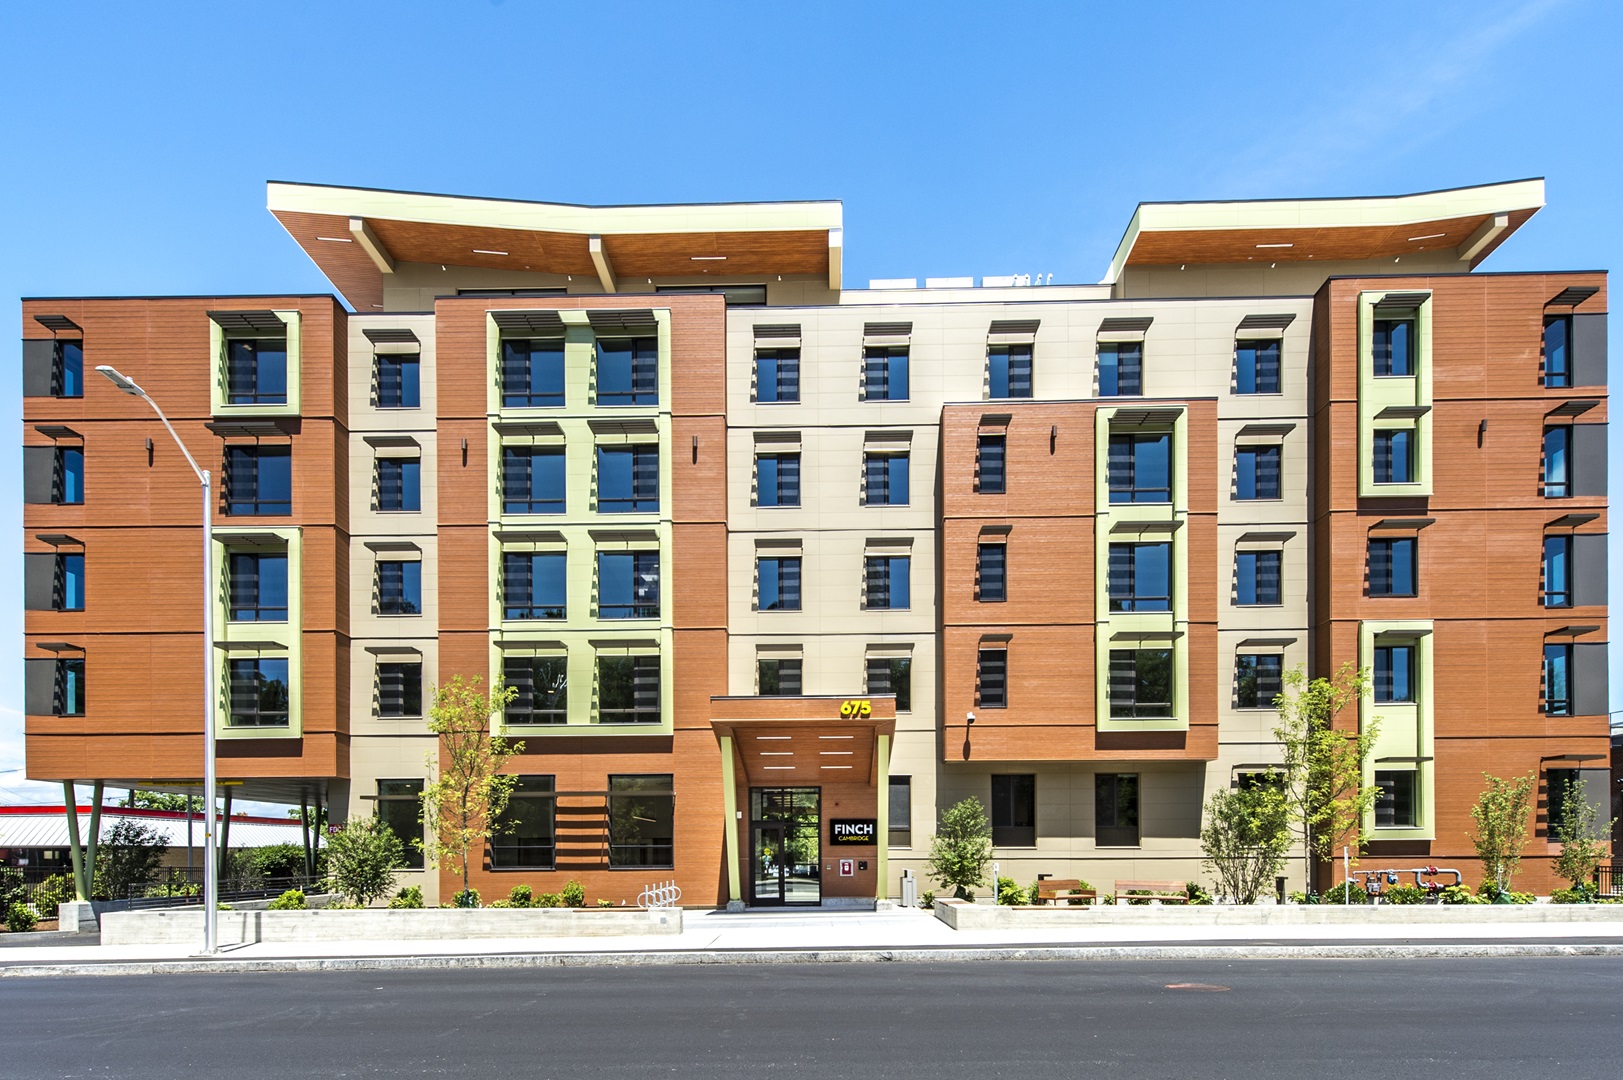 New Passive House affordable senior housing project opens in Boston